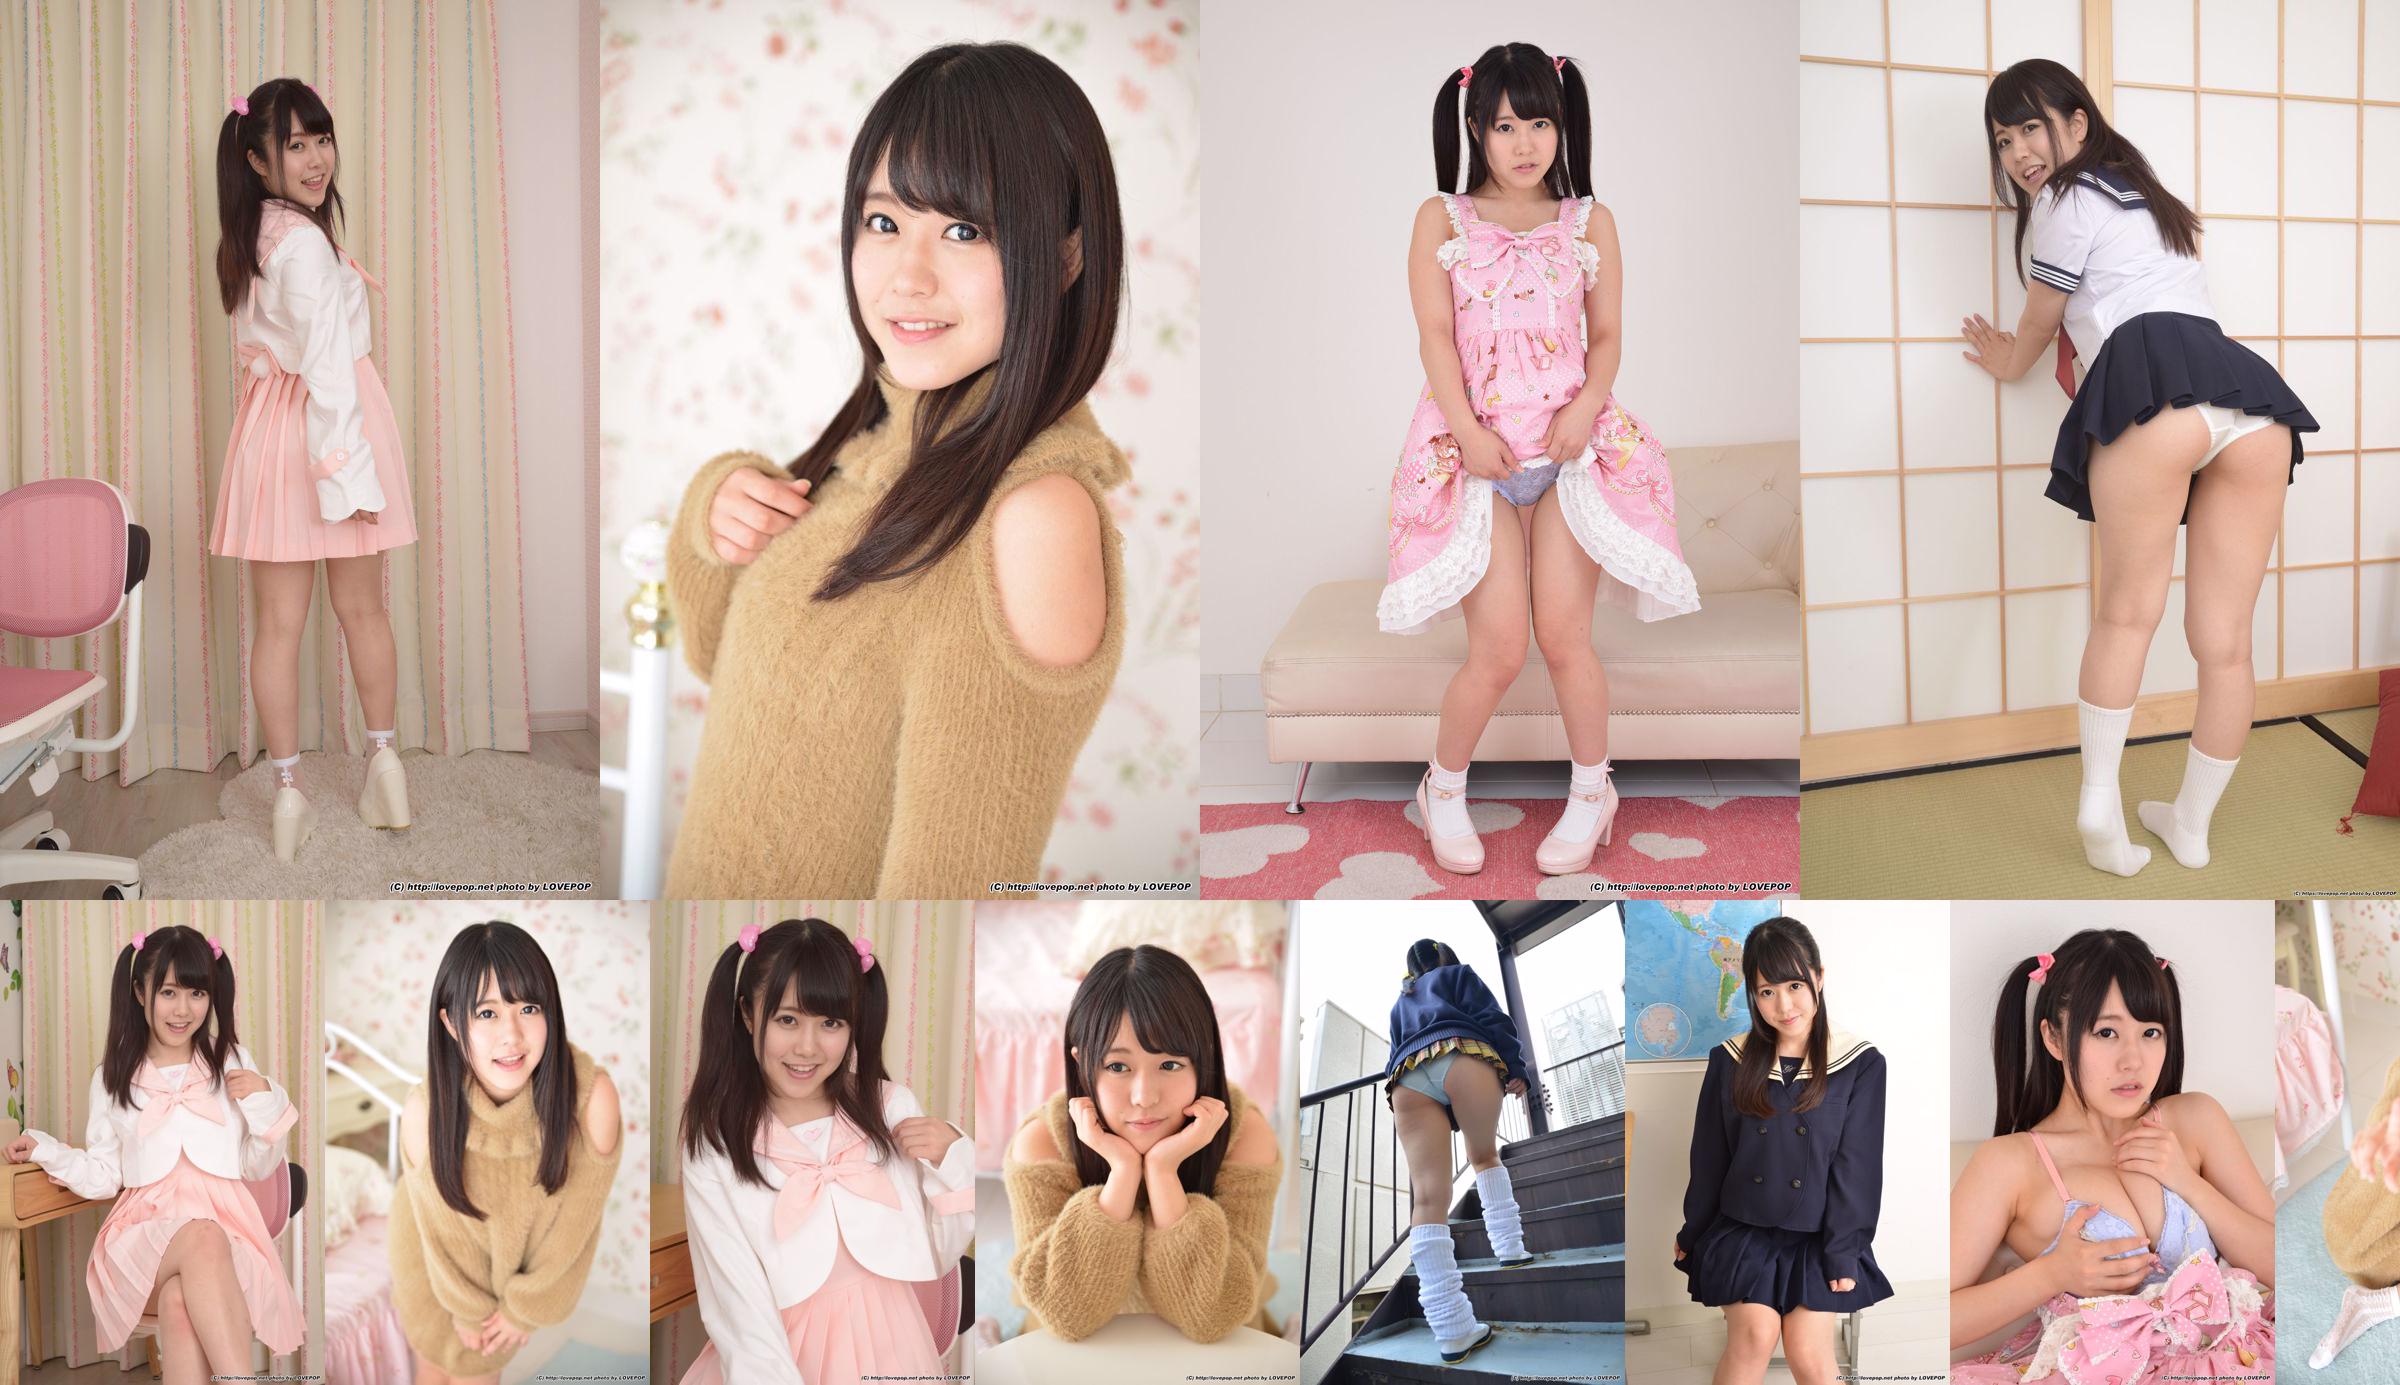 Xiaomi Kimi "The Temperament of a Neighbor Girl" [美妍社MiStar] VOL.301 No.908ff7 Page 3